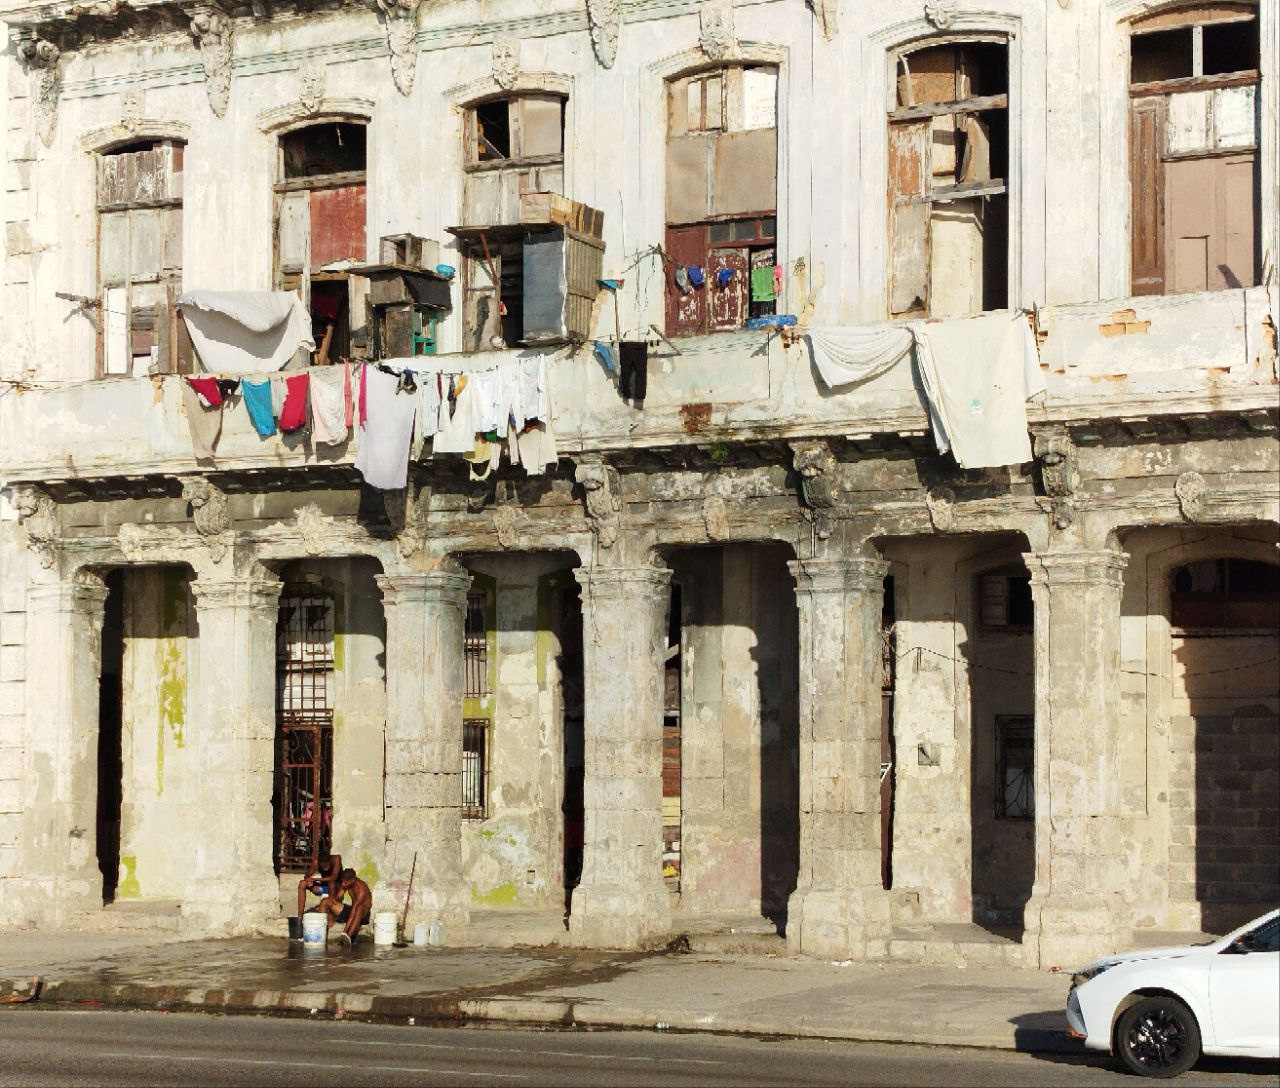 on-key-factors,-havana-is-ranked-as-one-of-the-worst-cities-in-the-world